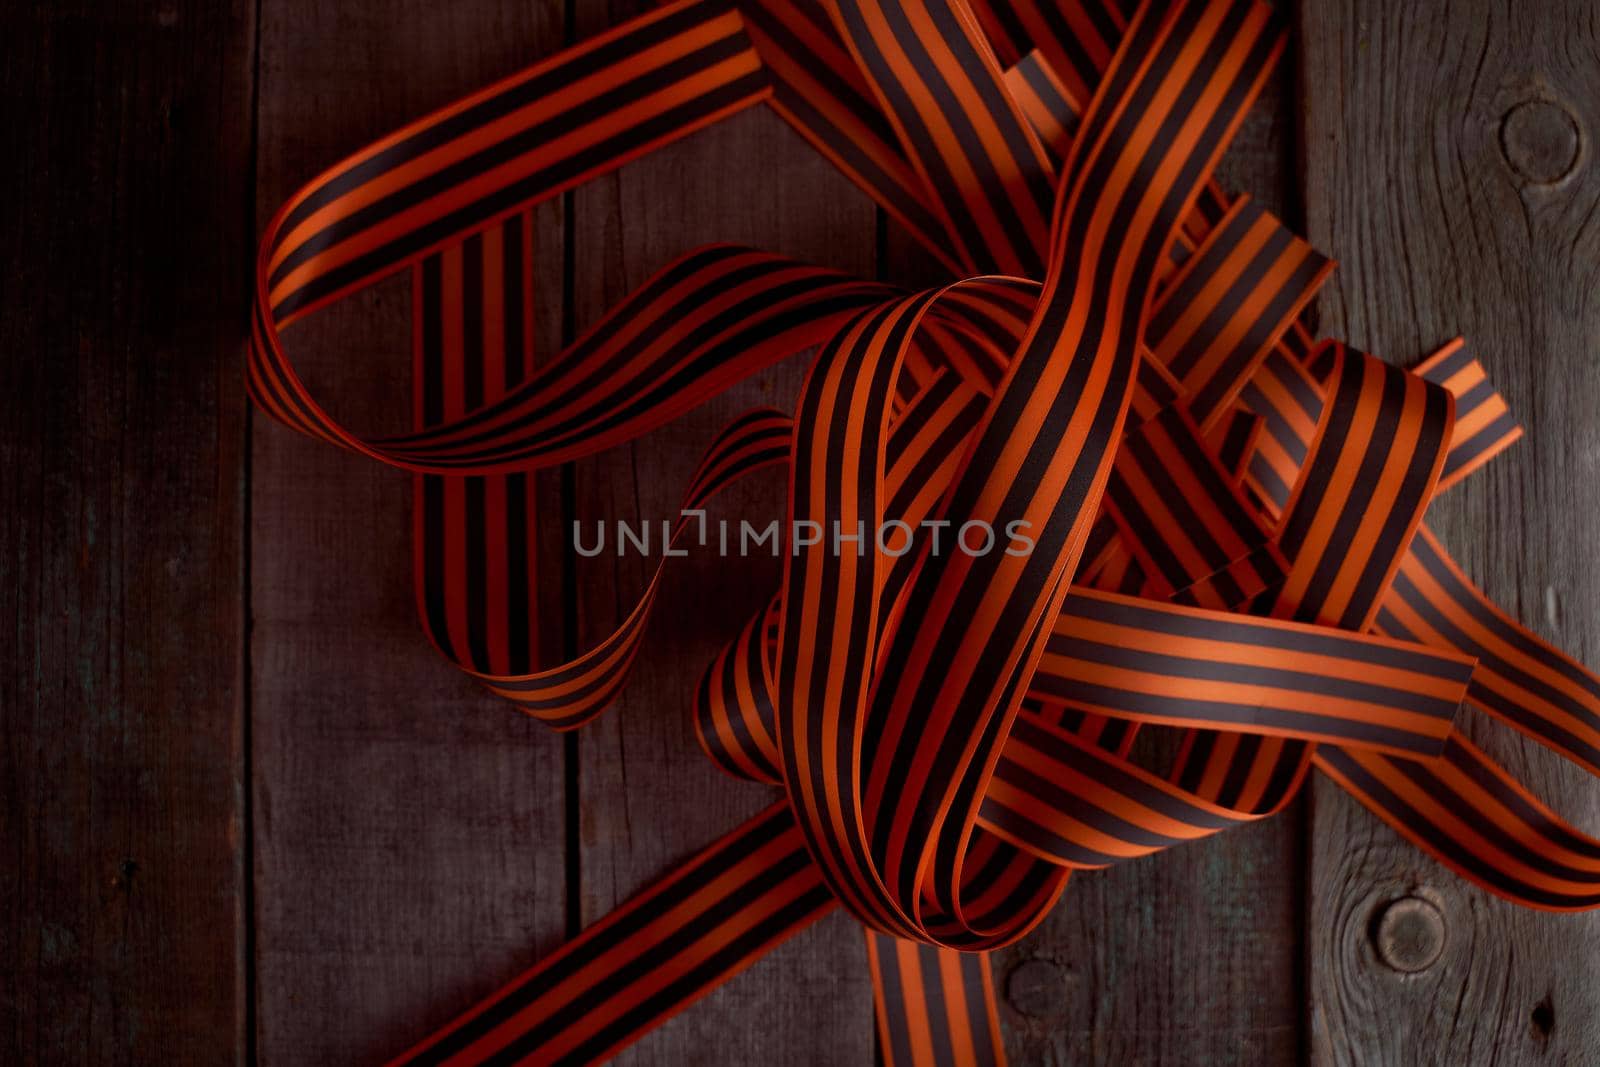 Black orange St. George ribbons on a wooden background by Xelar